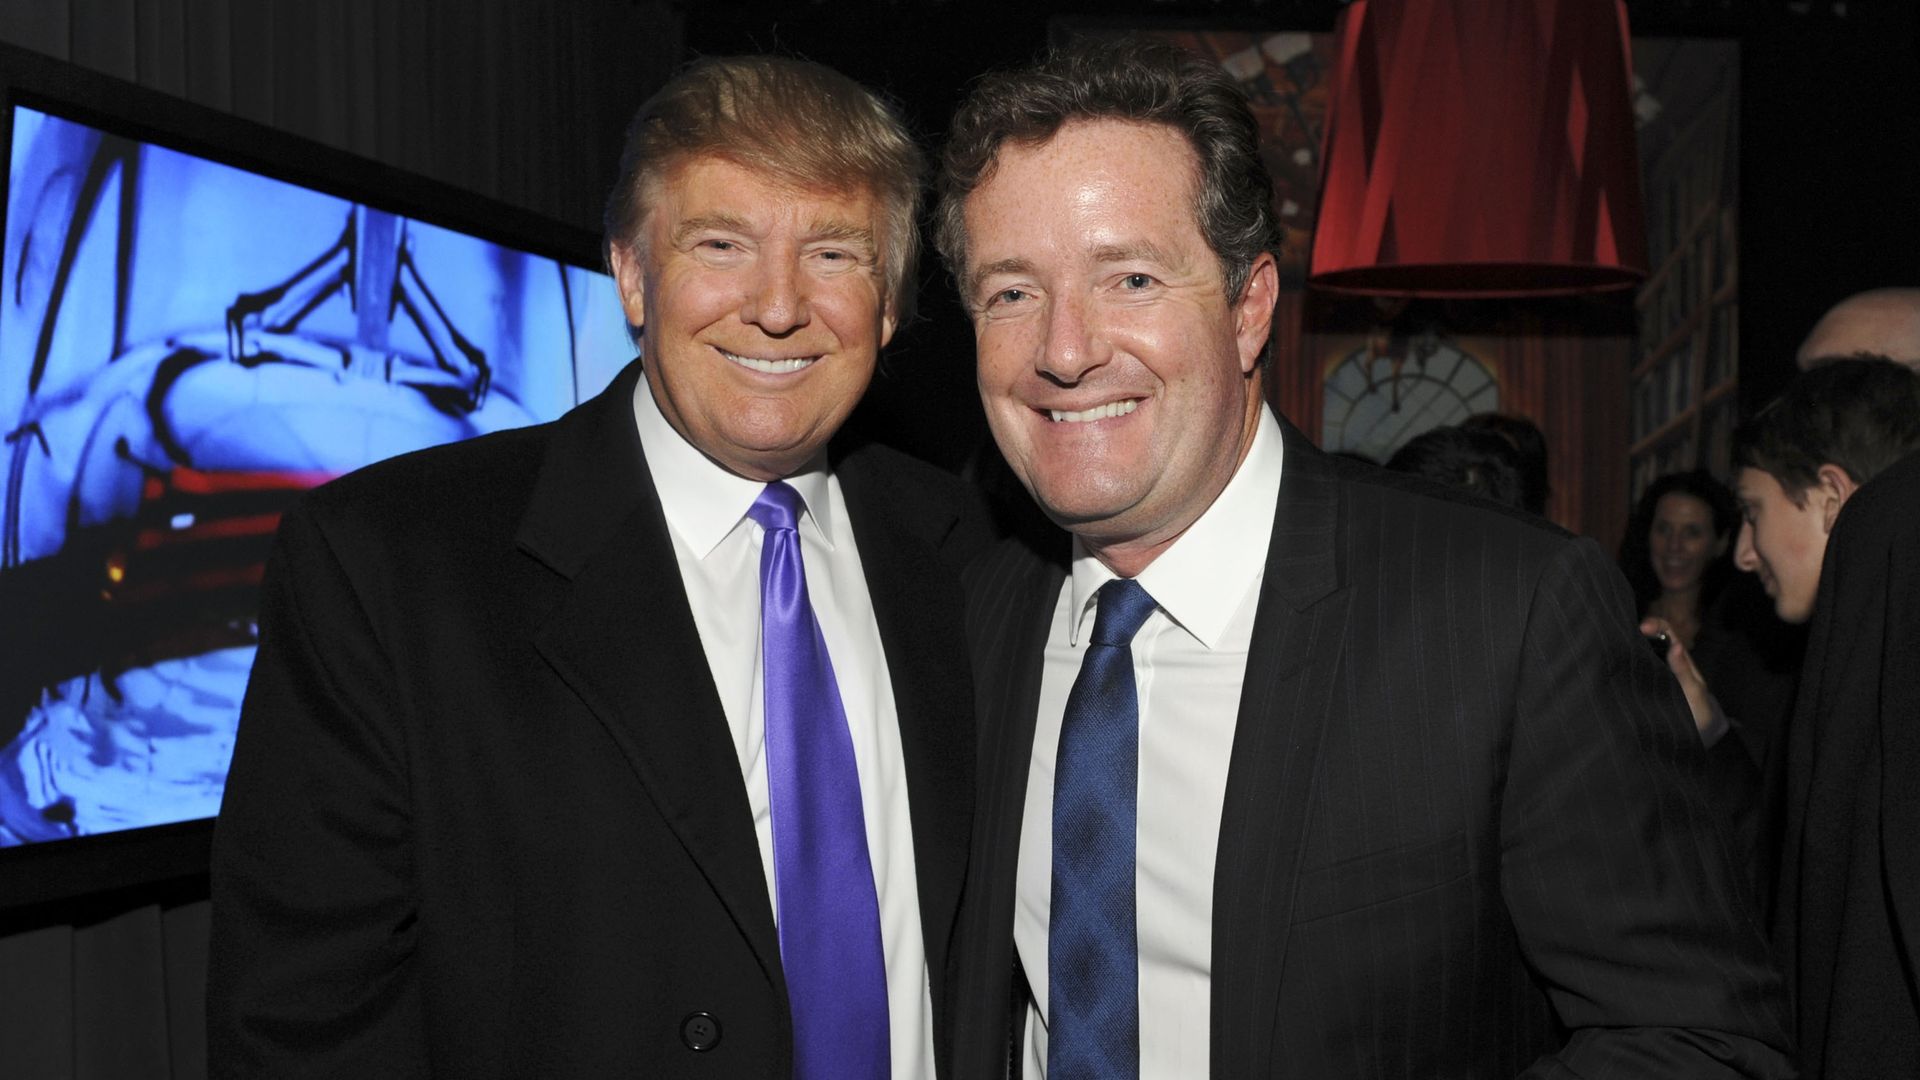 President  Trump and journalist Piers Morgan on November 10, 2010 in New York, New York. 